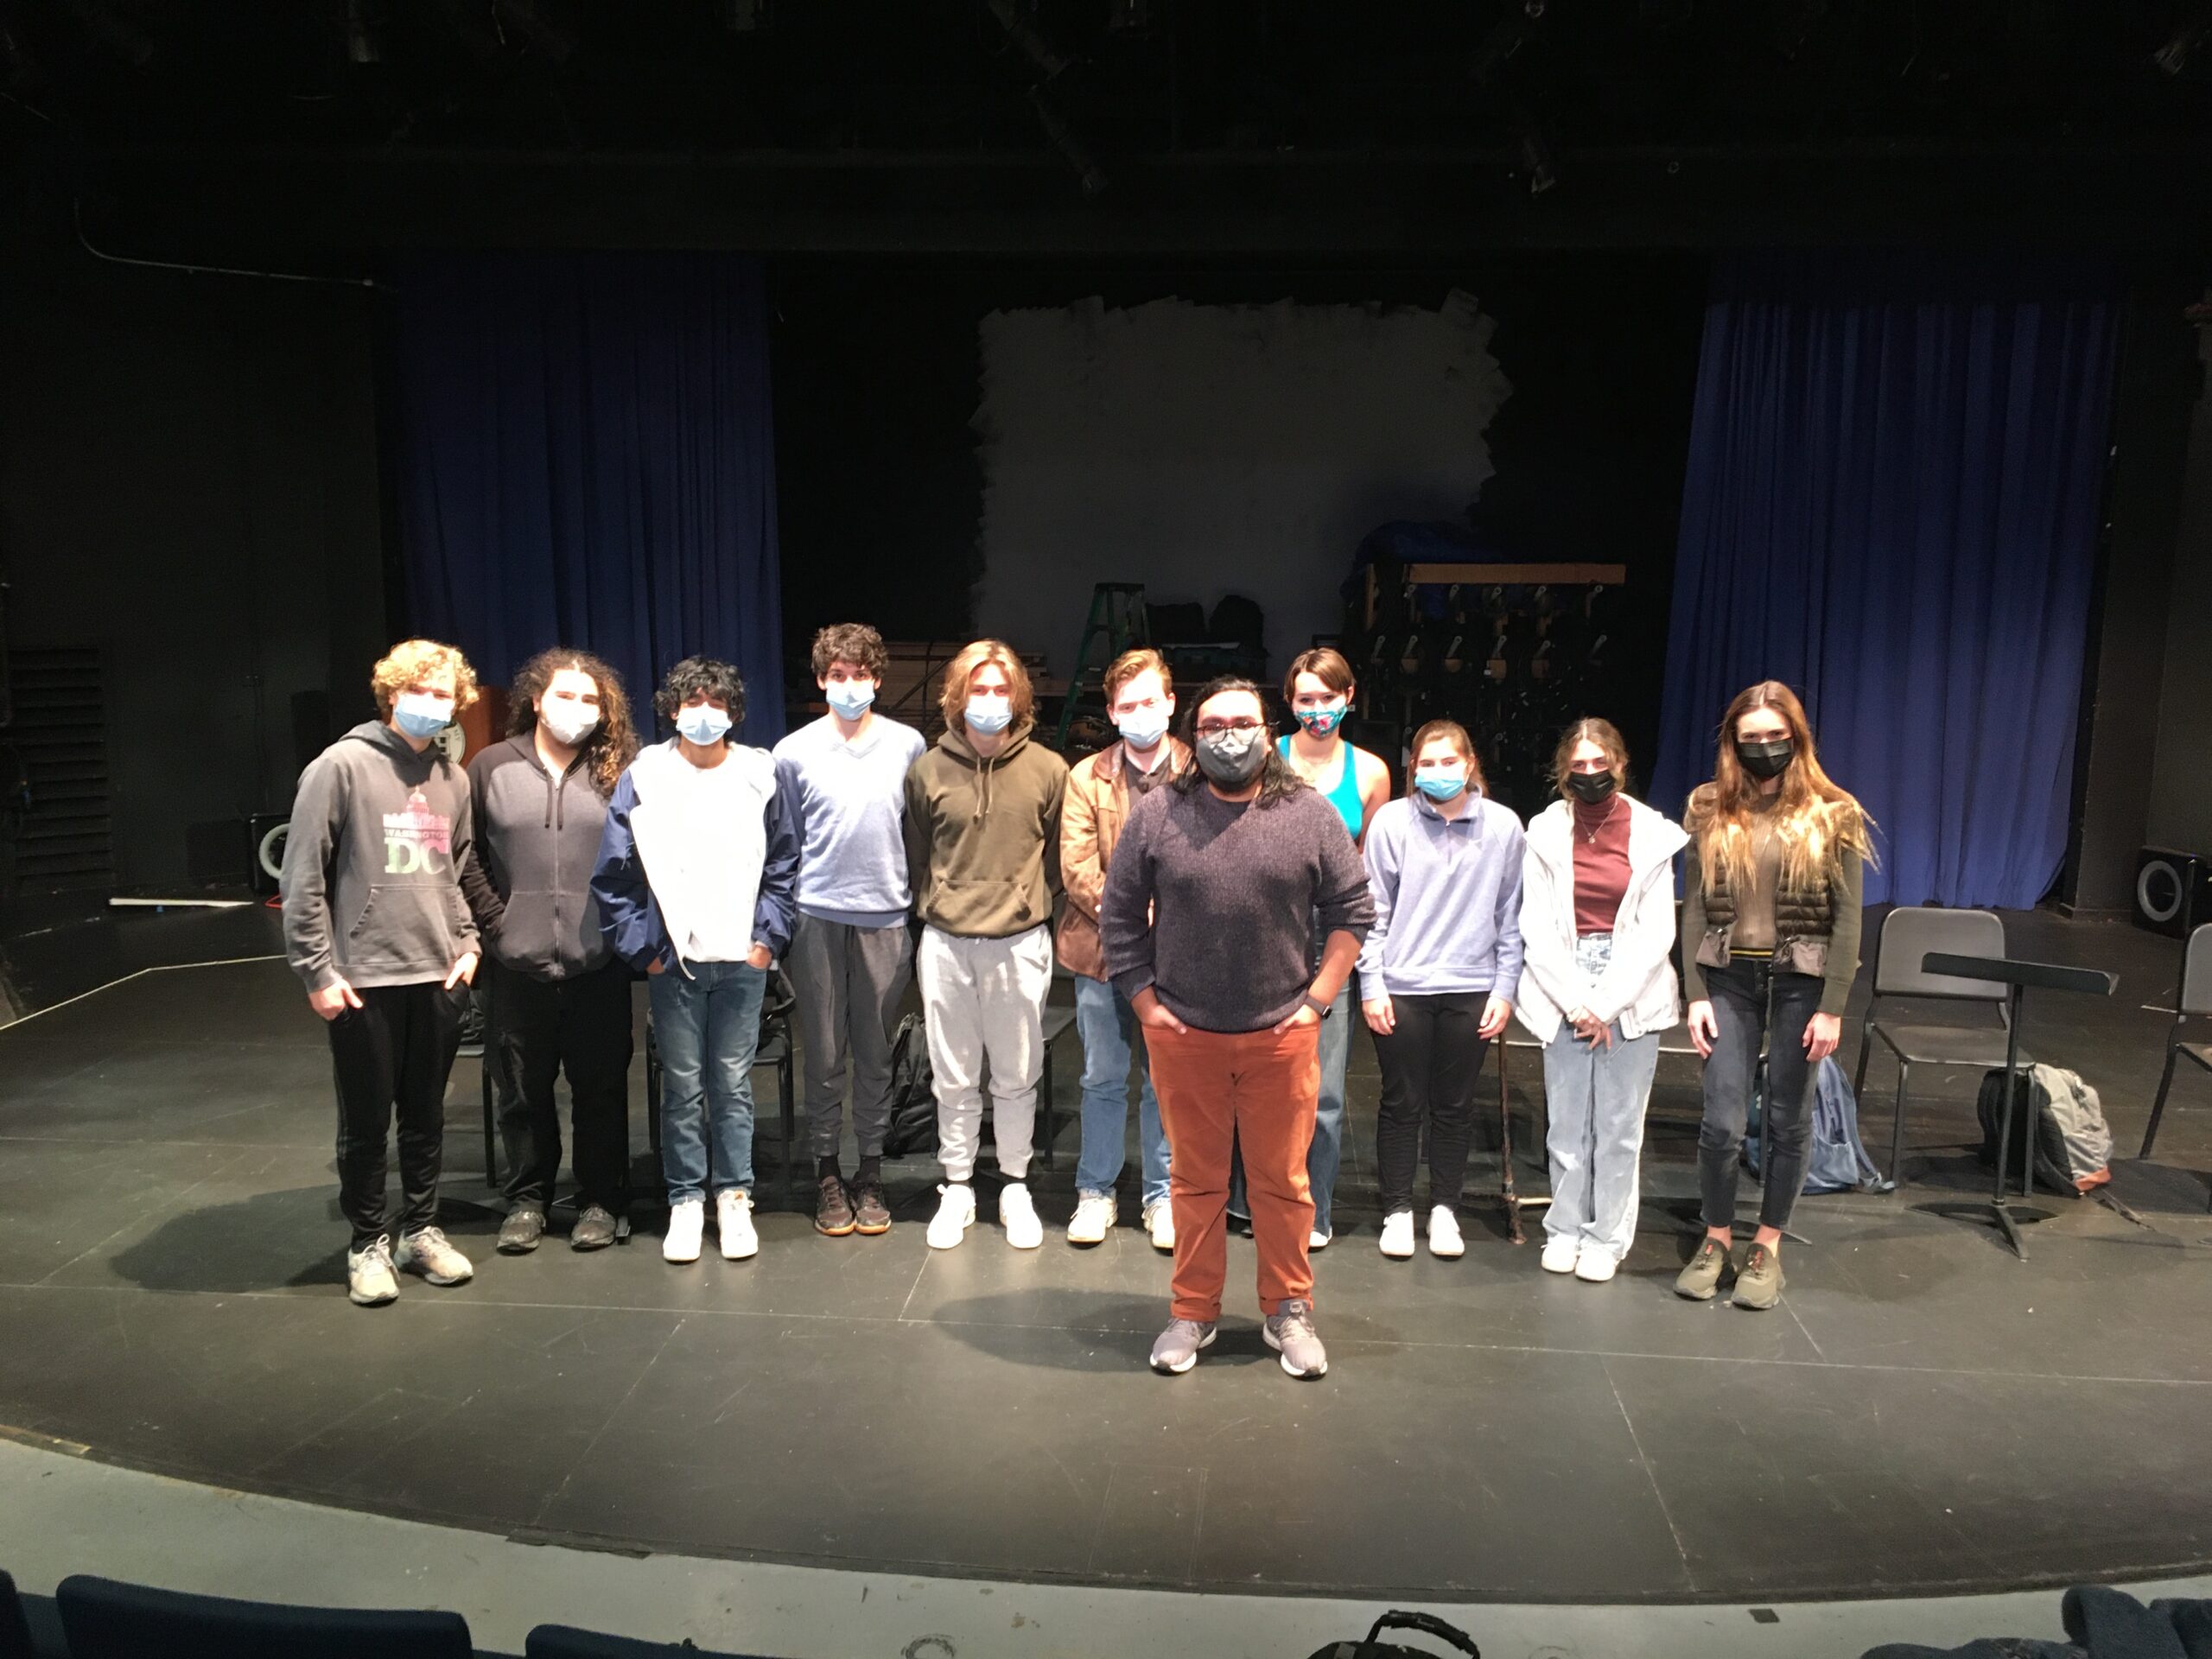 Students pose with guest playwright on stage in the P.A.C.